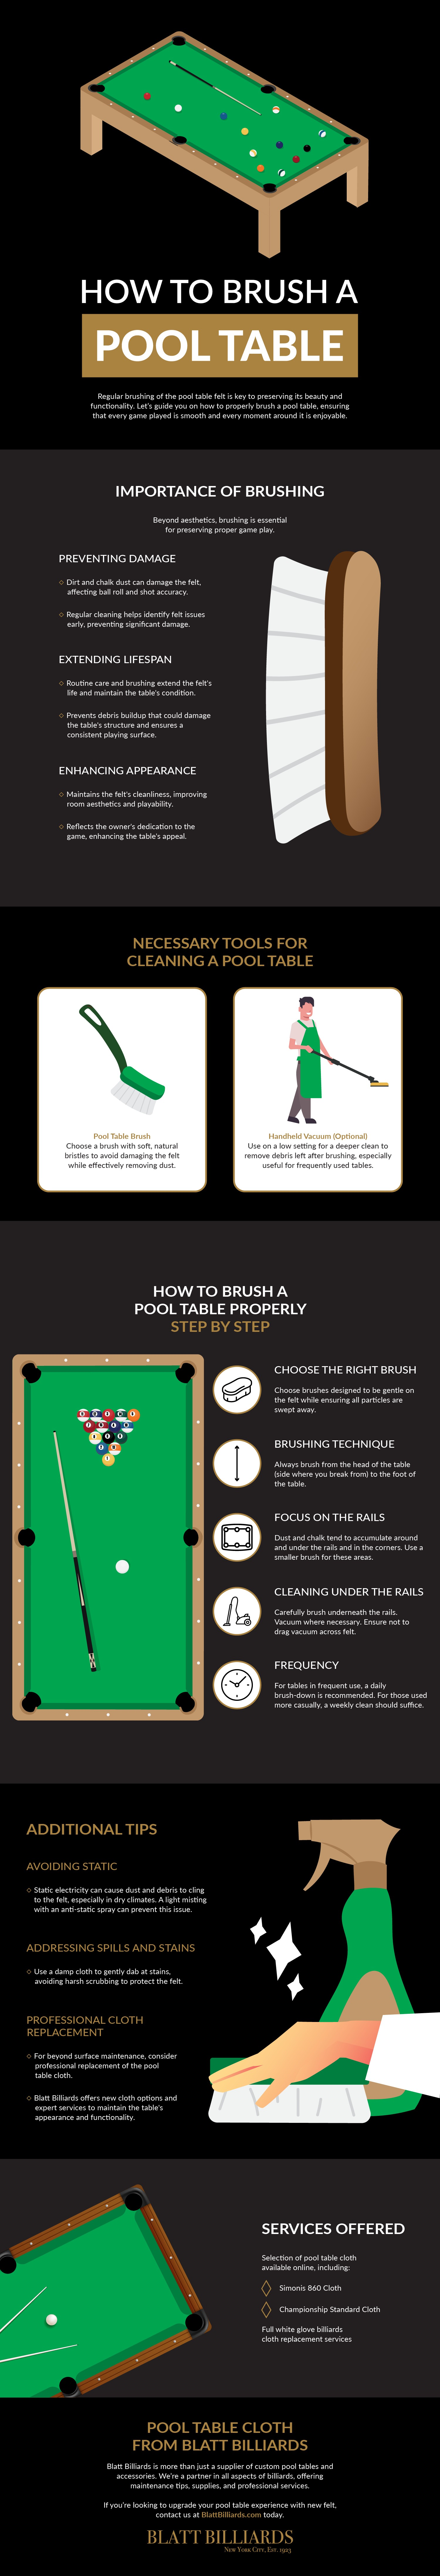 How to Brush a Pool Table